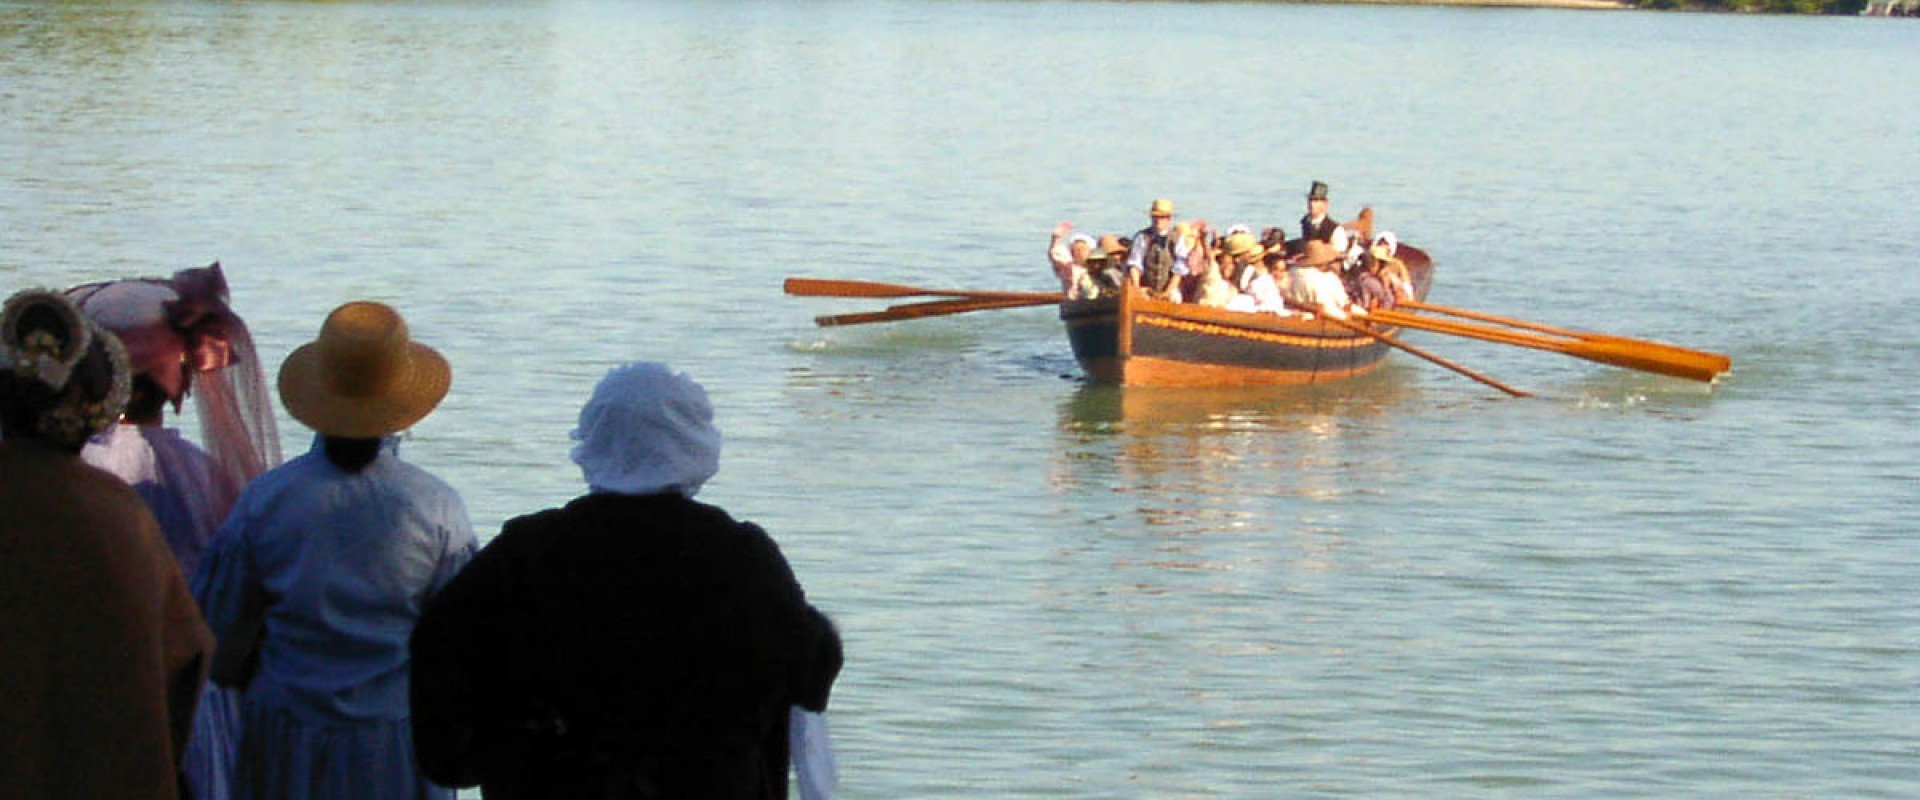 Re-enactment of 19th century travelers in a canoe through the underground railroad along the Detroit River. 